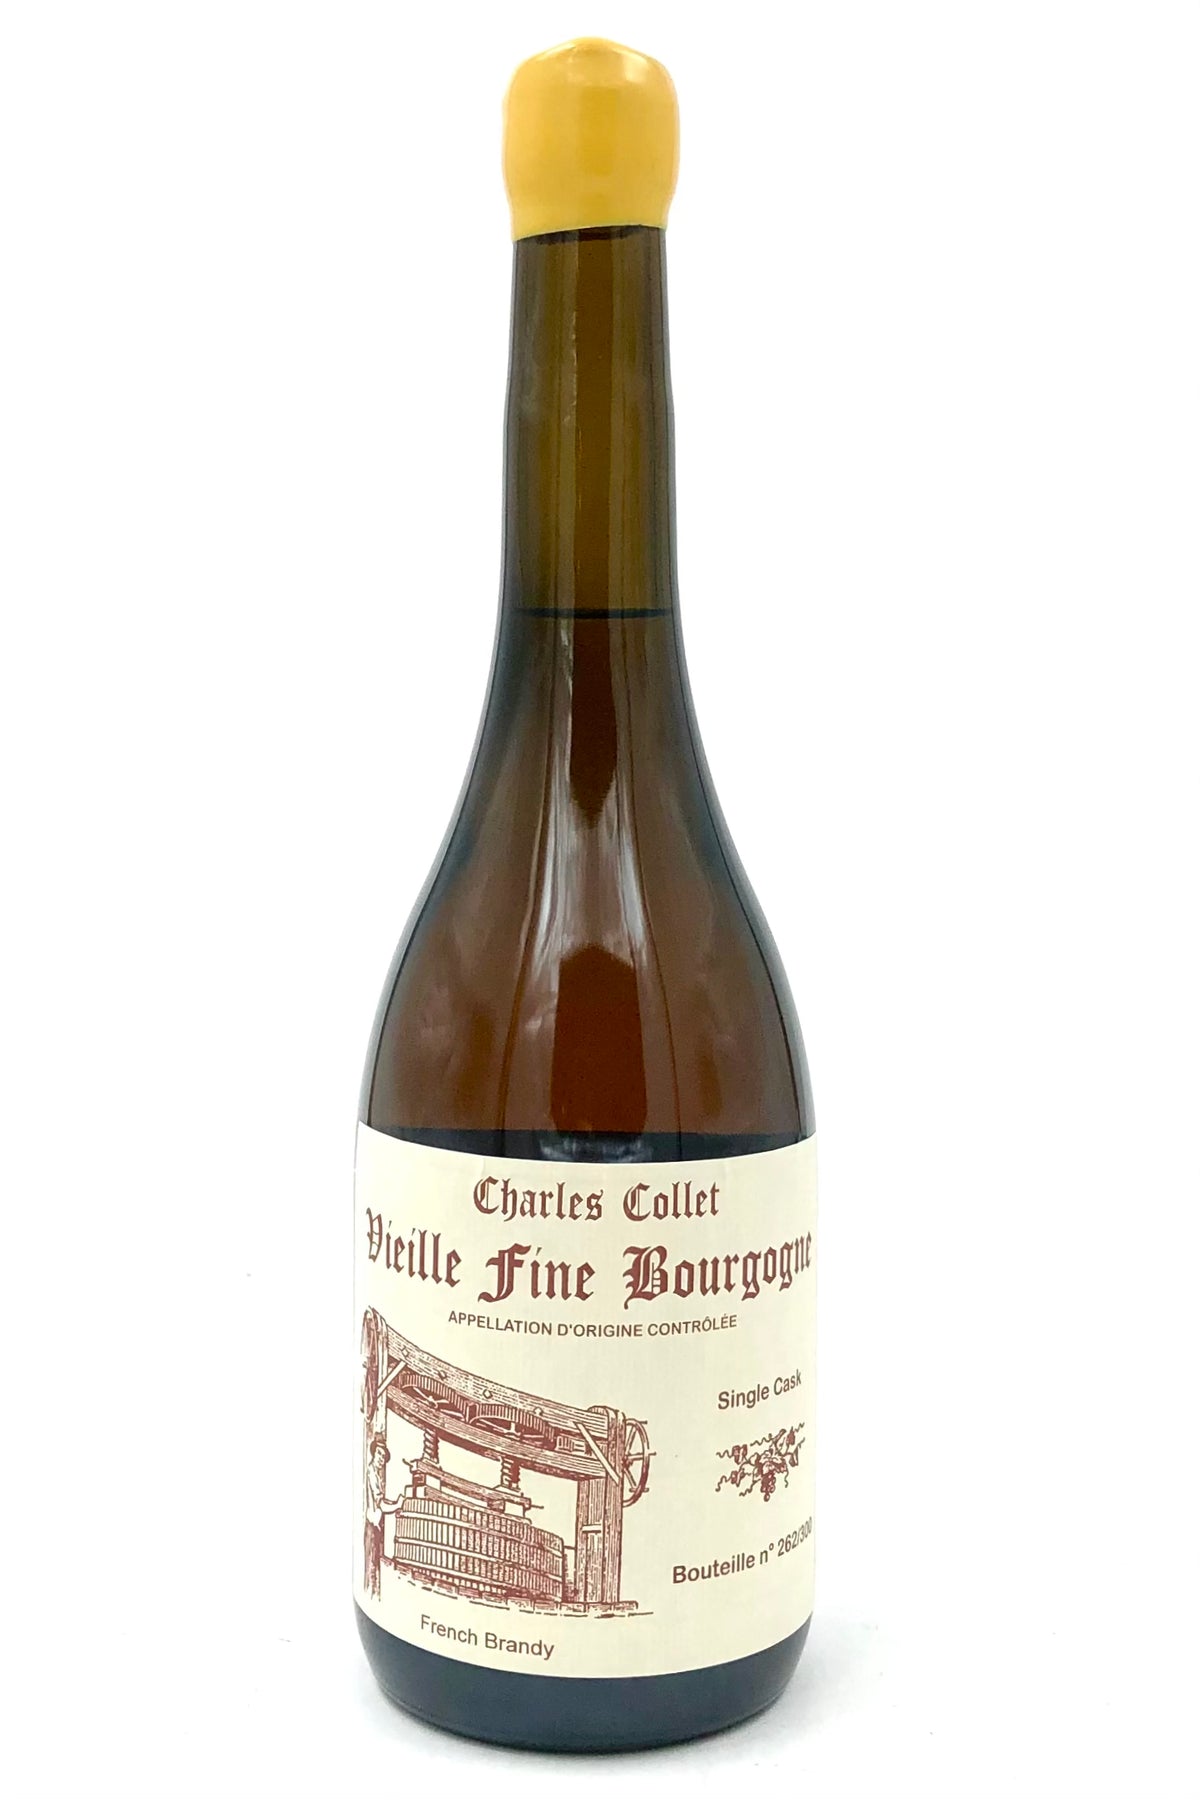 Charles Collet Vieille Fine Bourgogne French Brandy